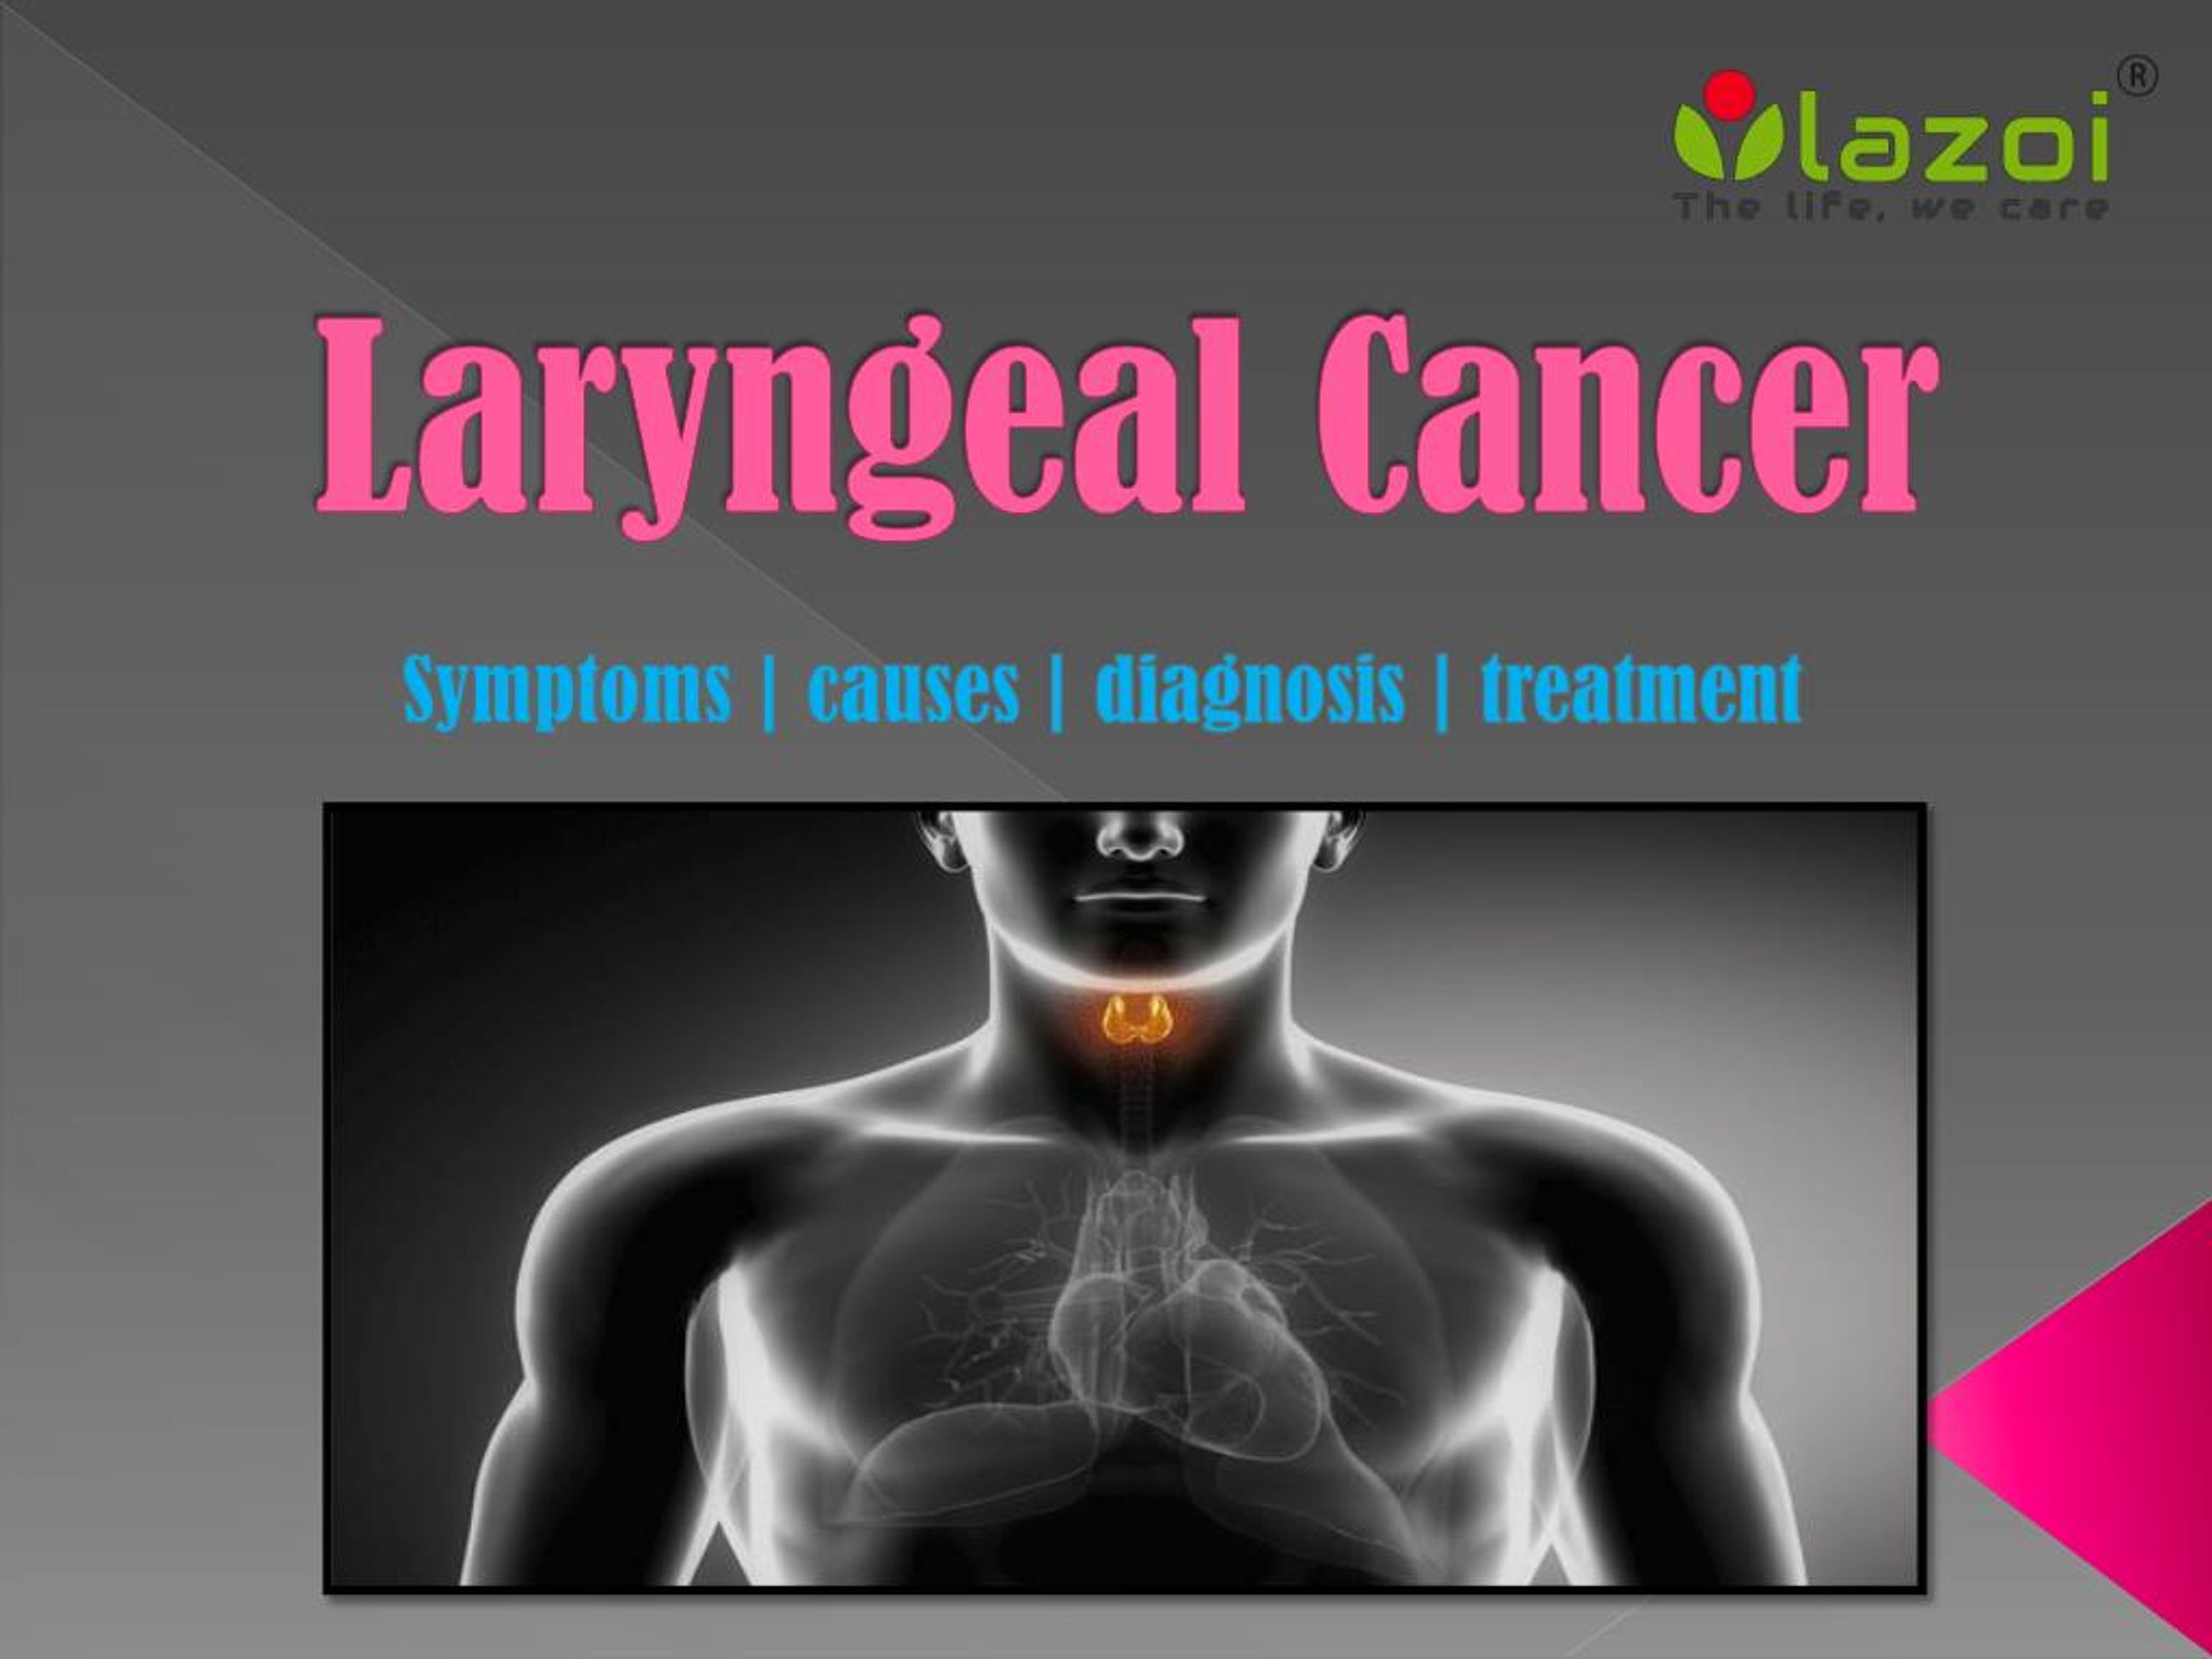 Ppt Laryngeal Cancer Symptoms Causes Diagnosis And Treatment Powerpoint Presentation Id 7233